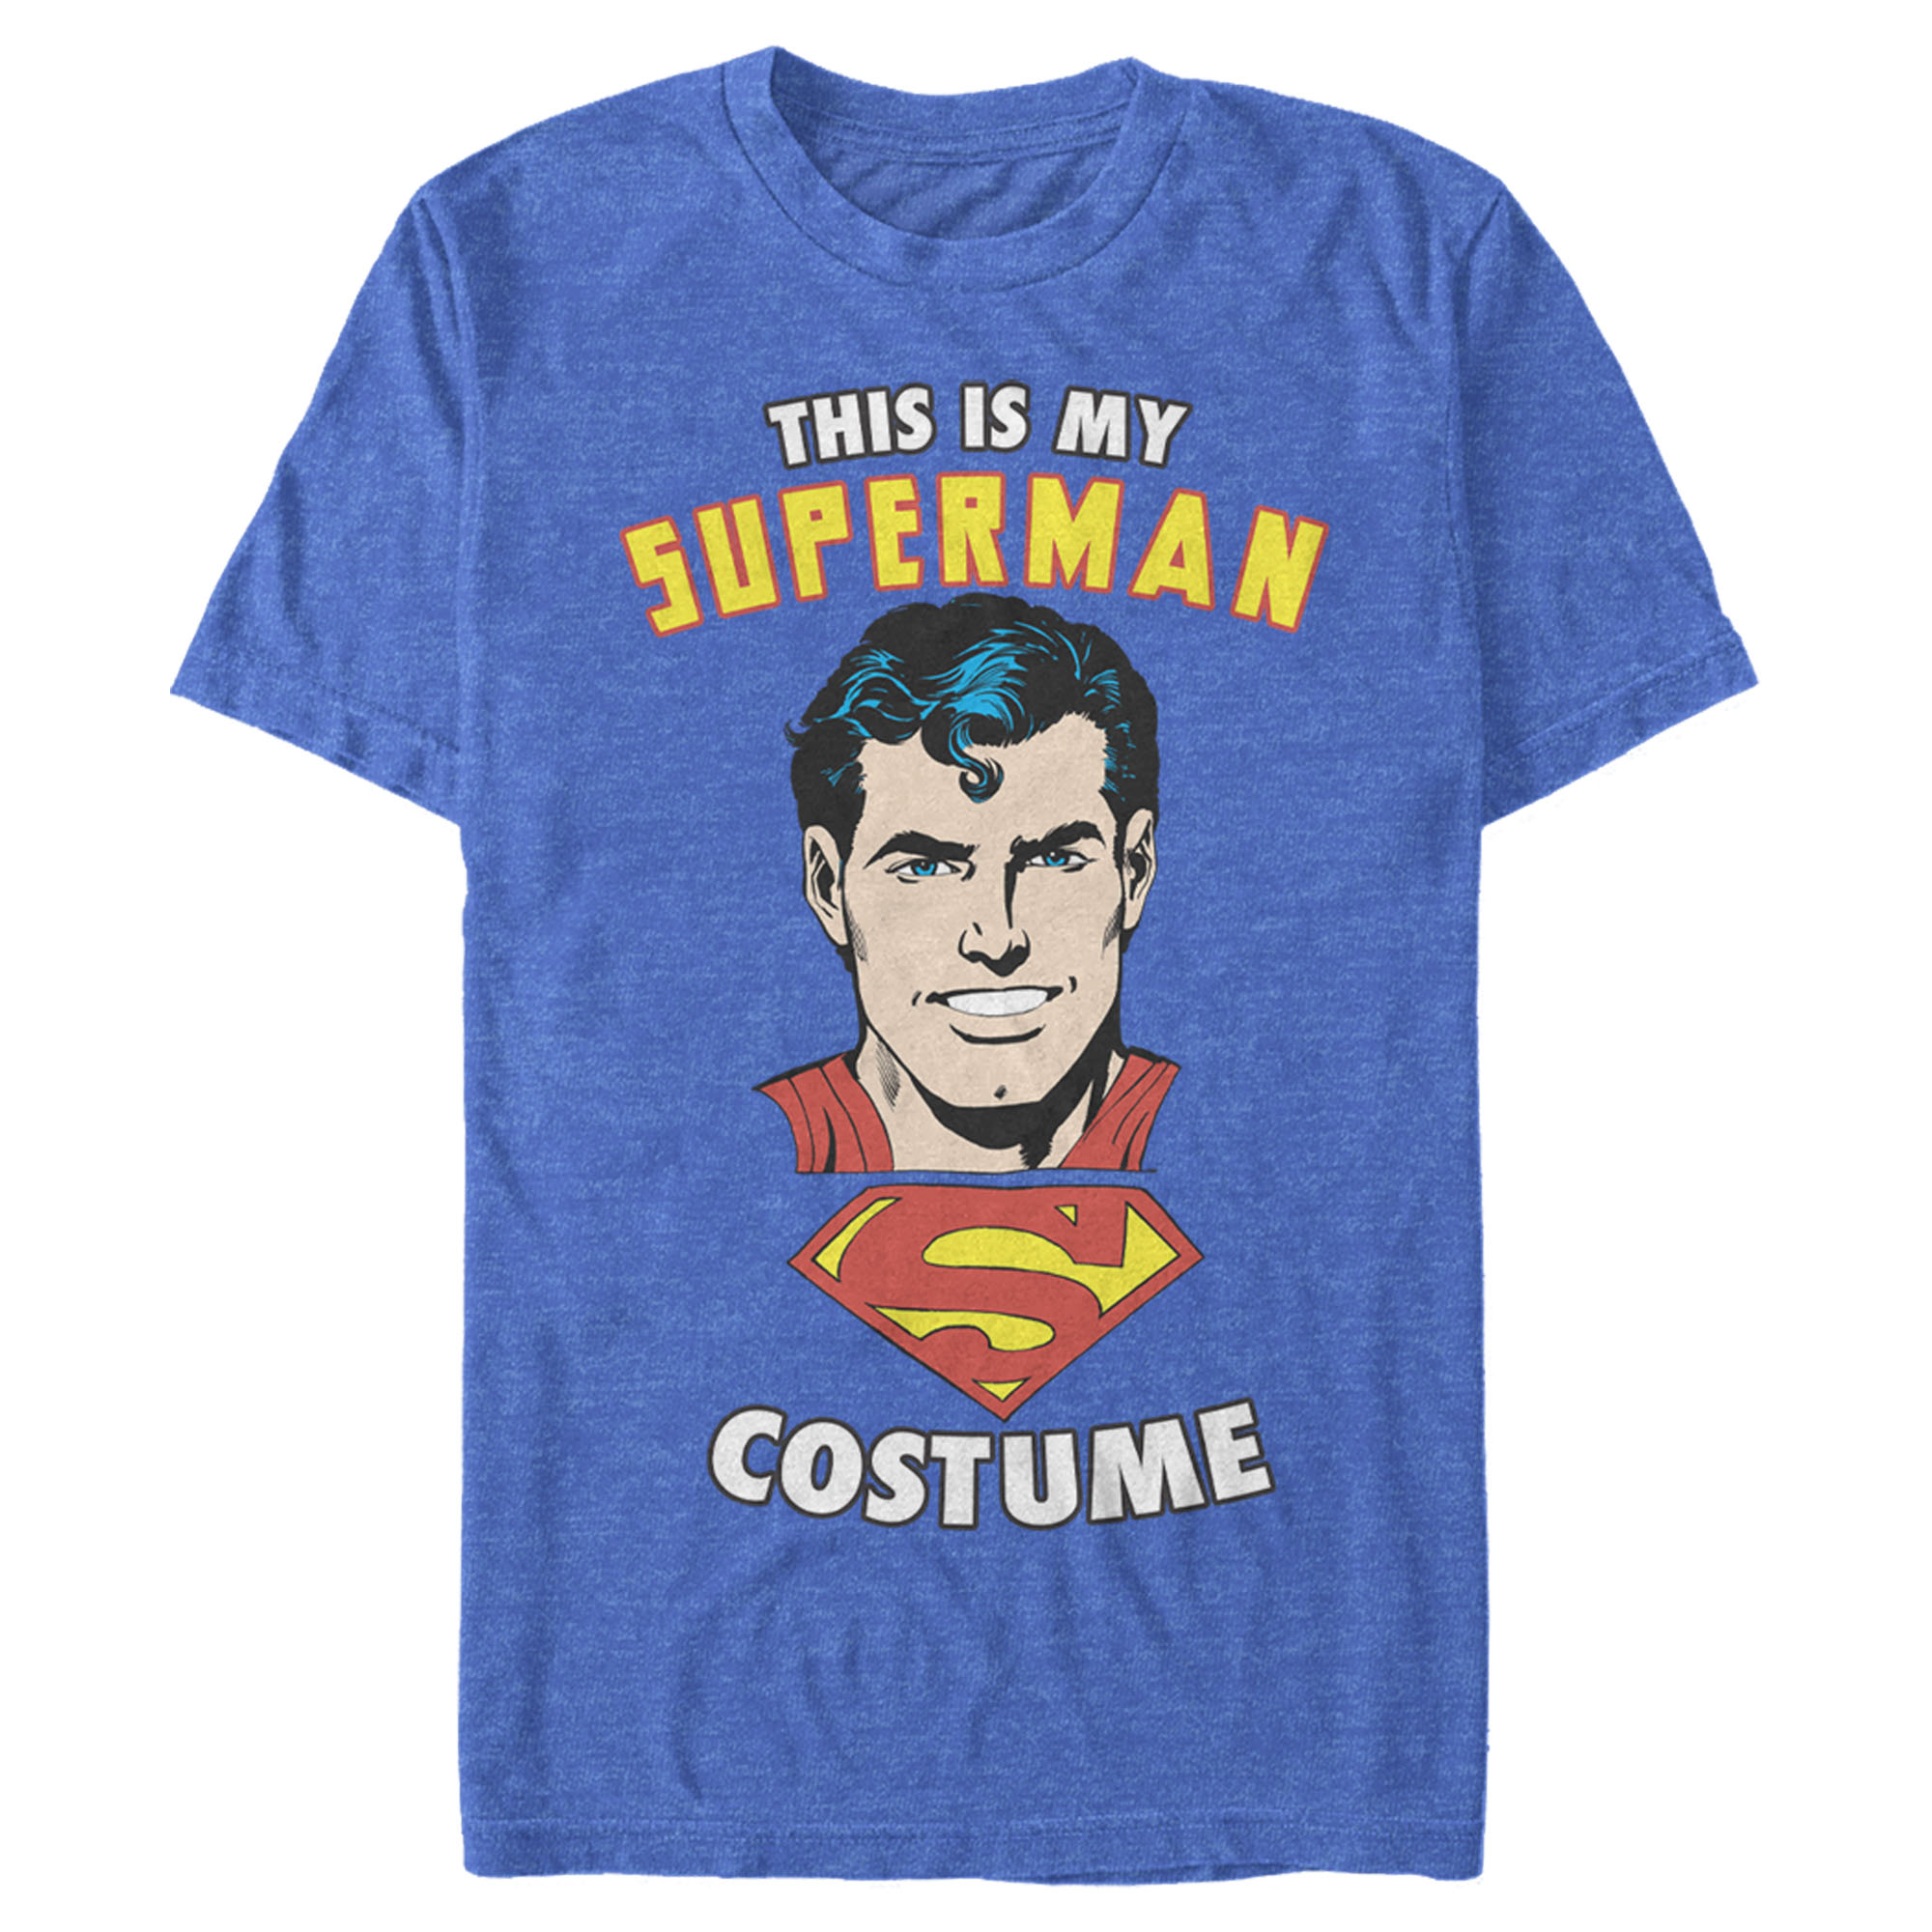 Men's Superman This is My Hero Costume  Graphic Tee Royal Blue Heather Small - image 1 of 4